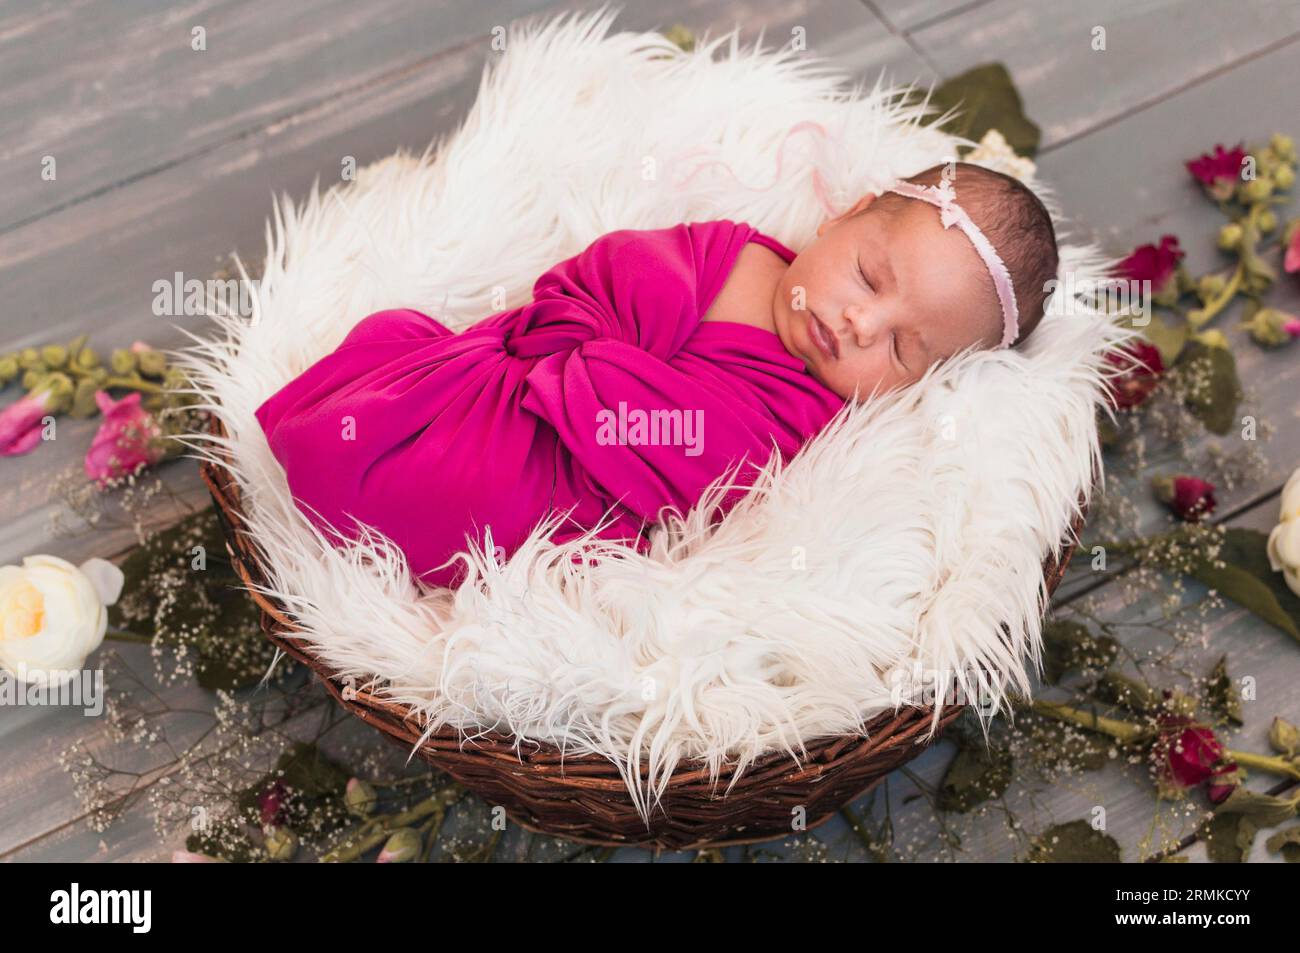 Small baby pink blanket Stock Photo